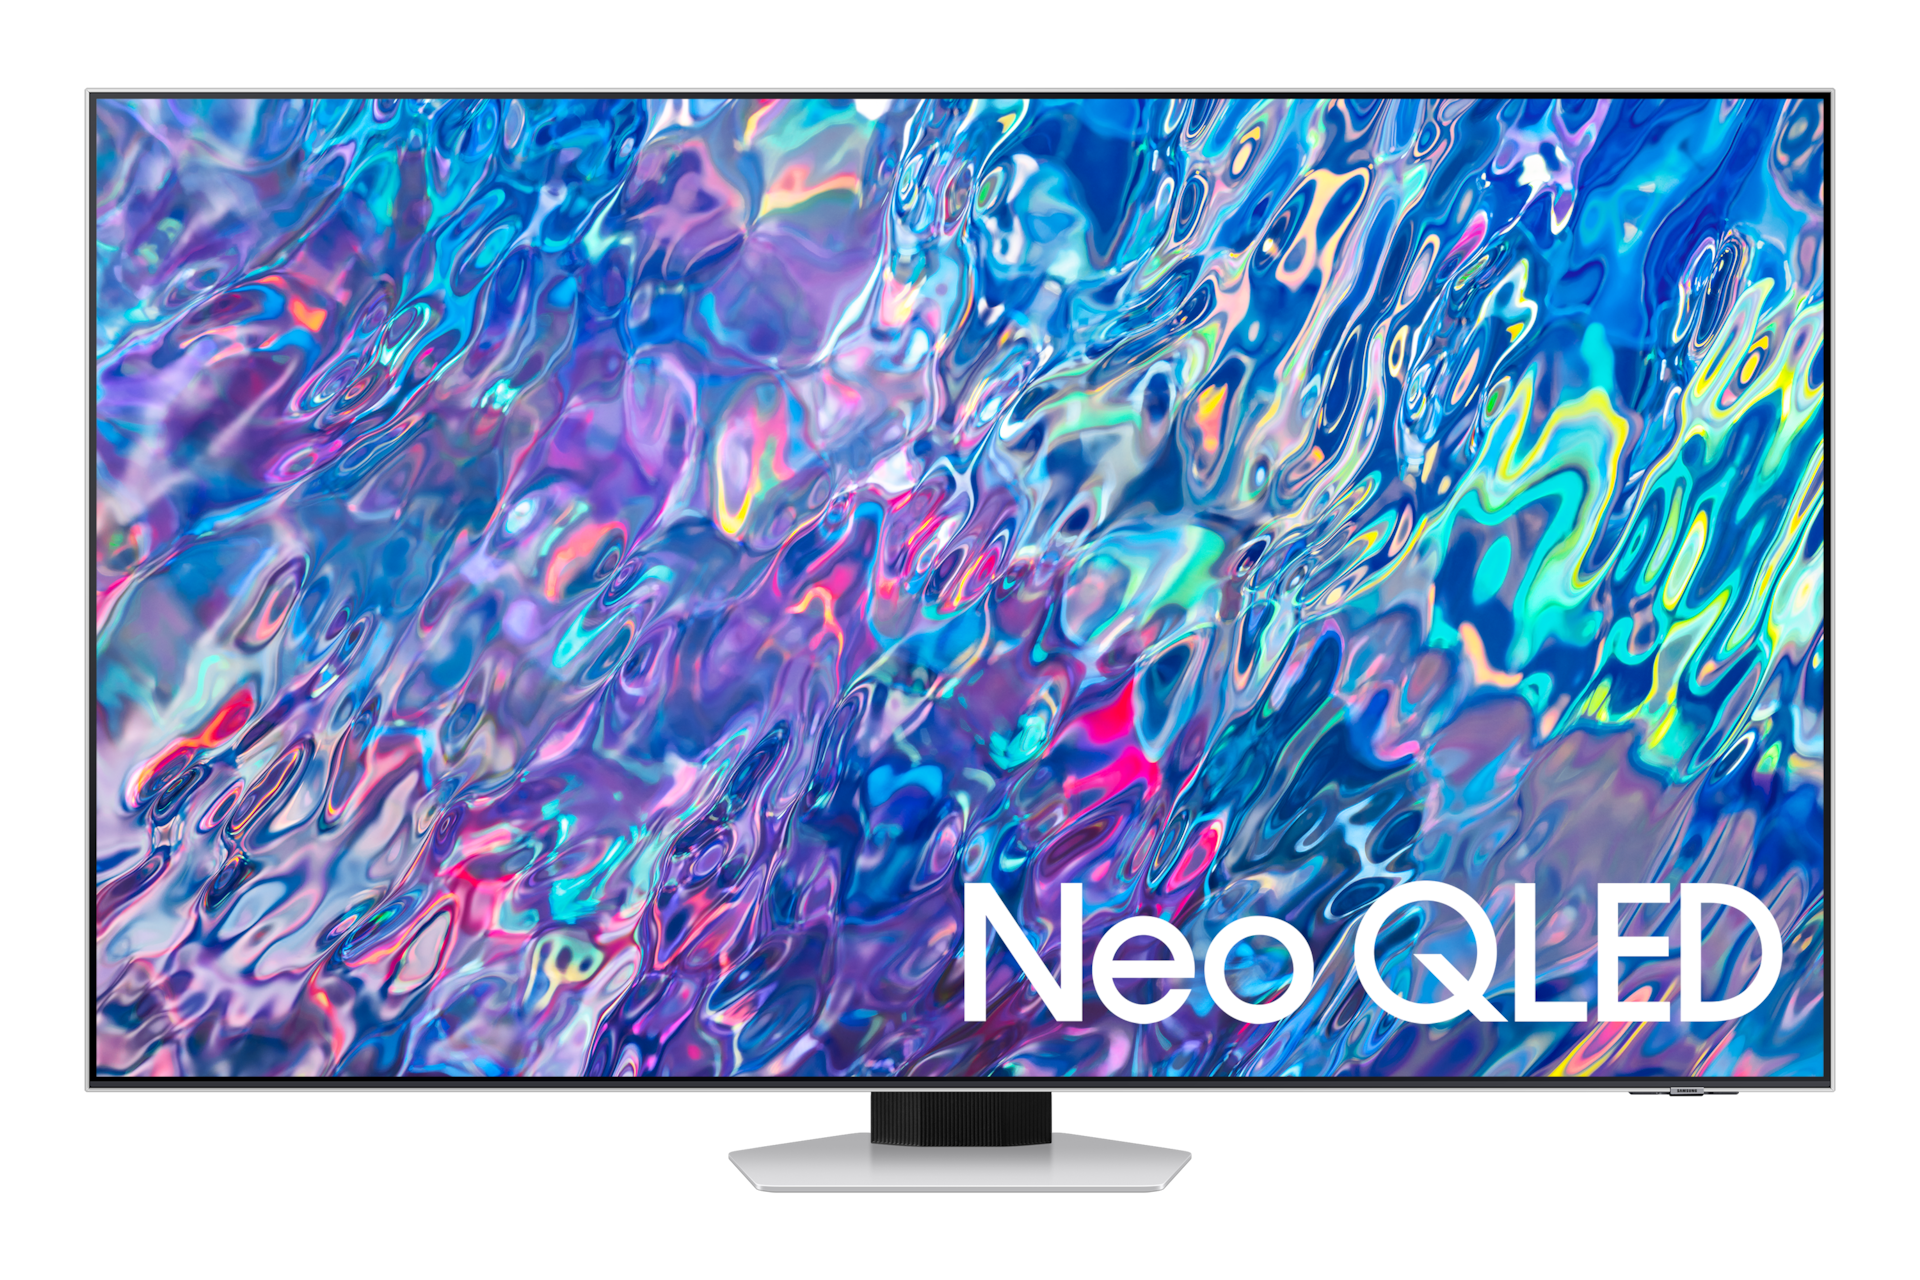 85 inch Samsung neo qled 4k tv, smart tv, qn85b, 2022 model (QA85QN85BAKXXS) price and features